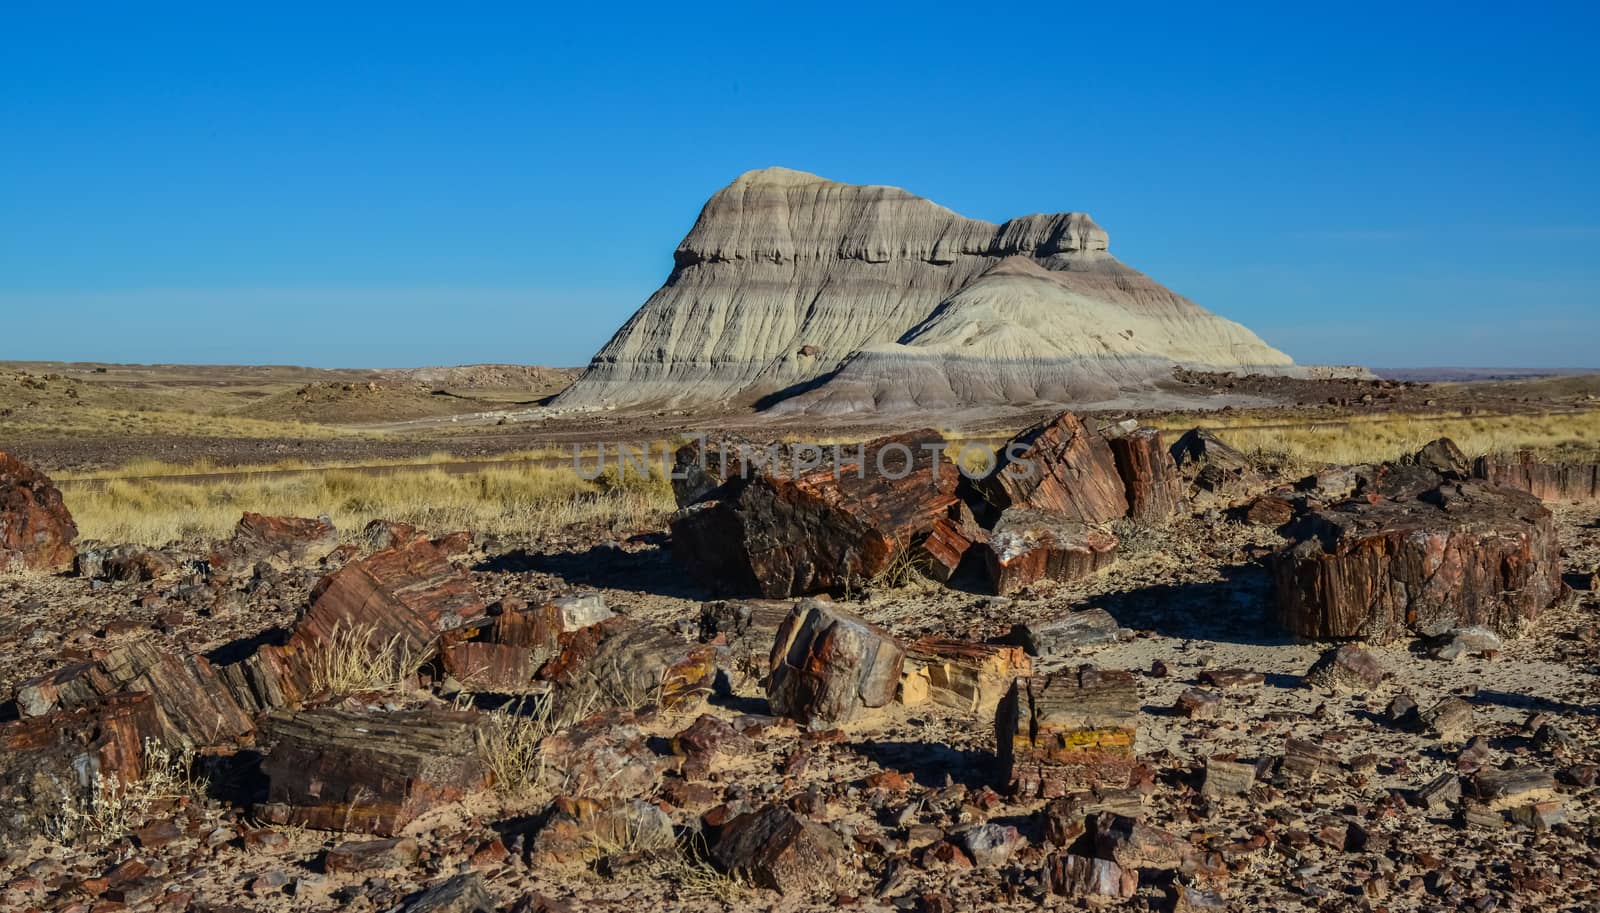 The trunks of petrified trees, multi-colored crystals of minerals. Petrified Forest National Park, Arizona